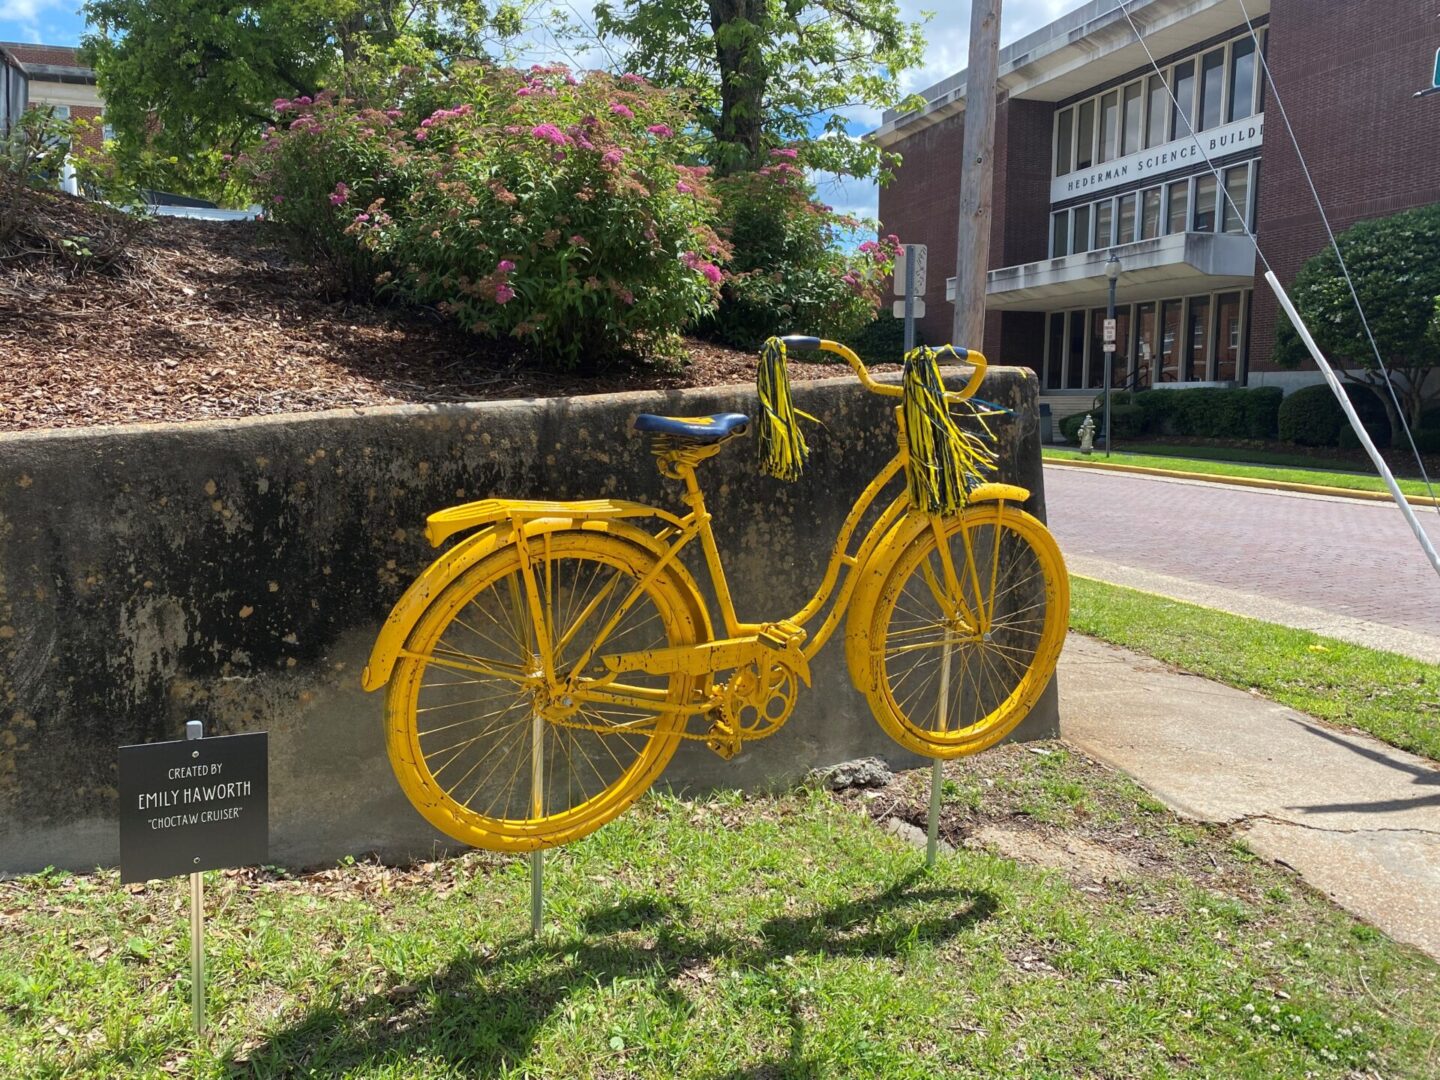 A yellow bicycle is on the grass near some bushes.